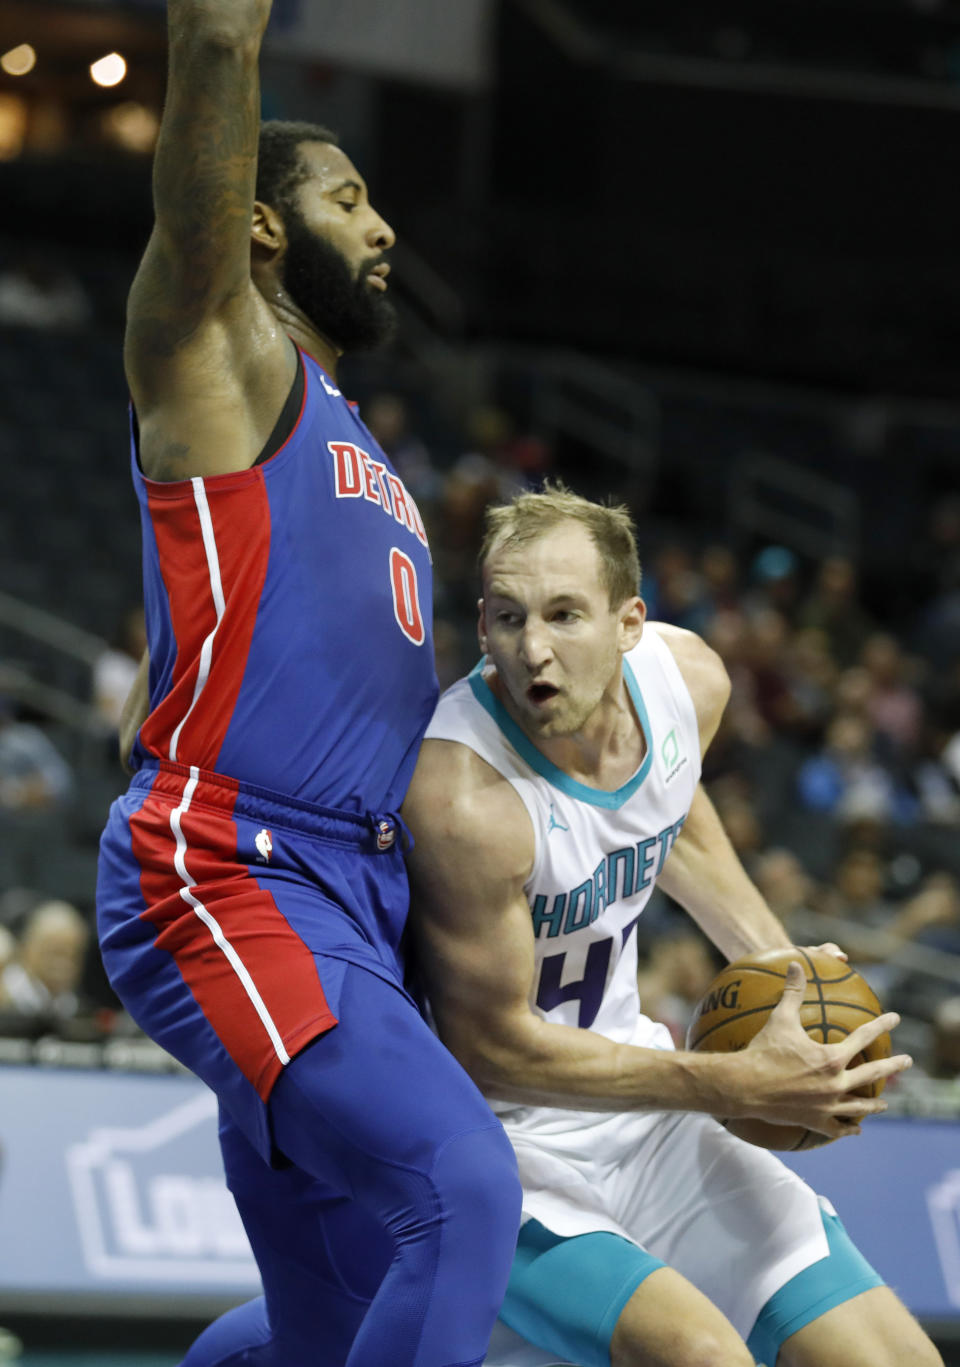 Charlotte Hornets' Cody Zeller (40) tries to get around Detroit Pistons' Andre Drummond (0) during the first half of an NBA preseason basketball game in Charlotte, N.C., Wednesday, Oct. 16, 2019. (AP Photo/Bob Leverone)